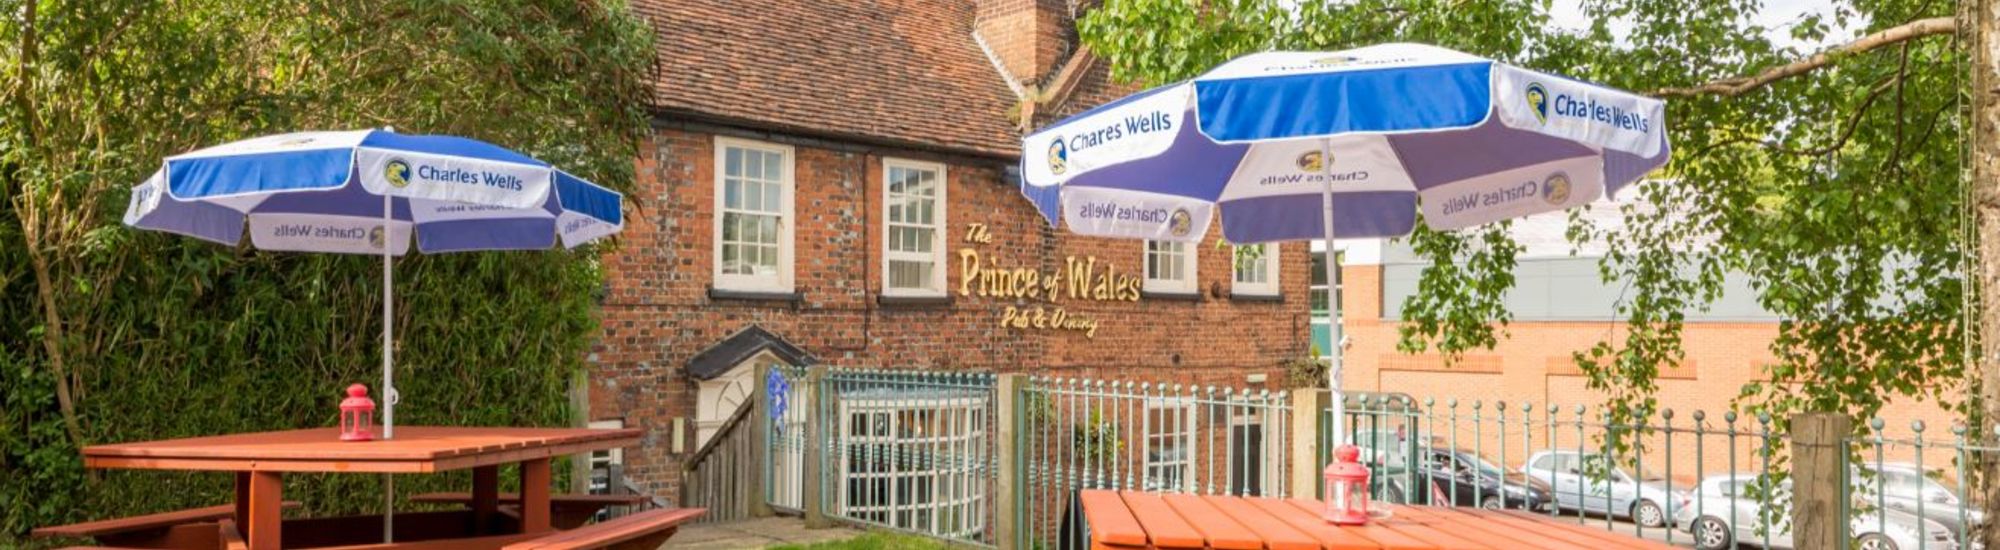 The Prince of Wales, Ampthill